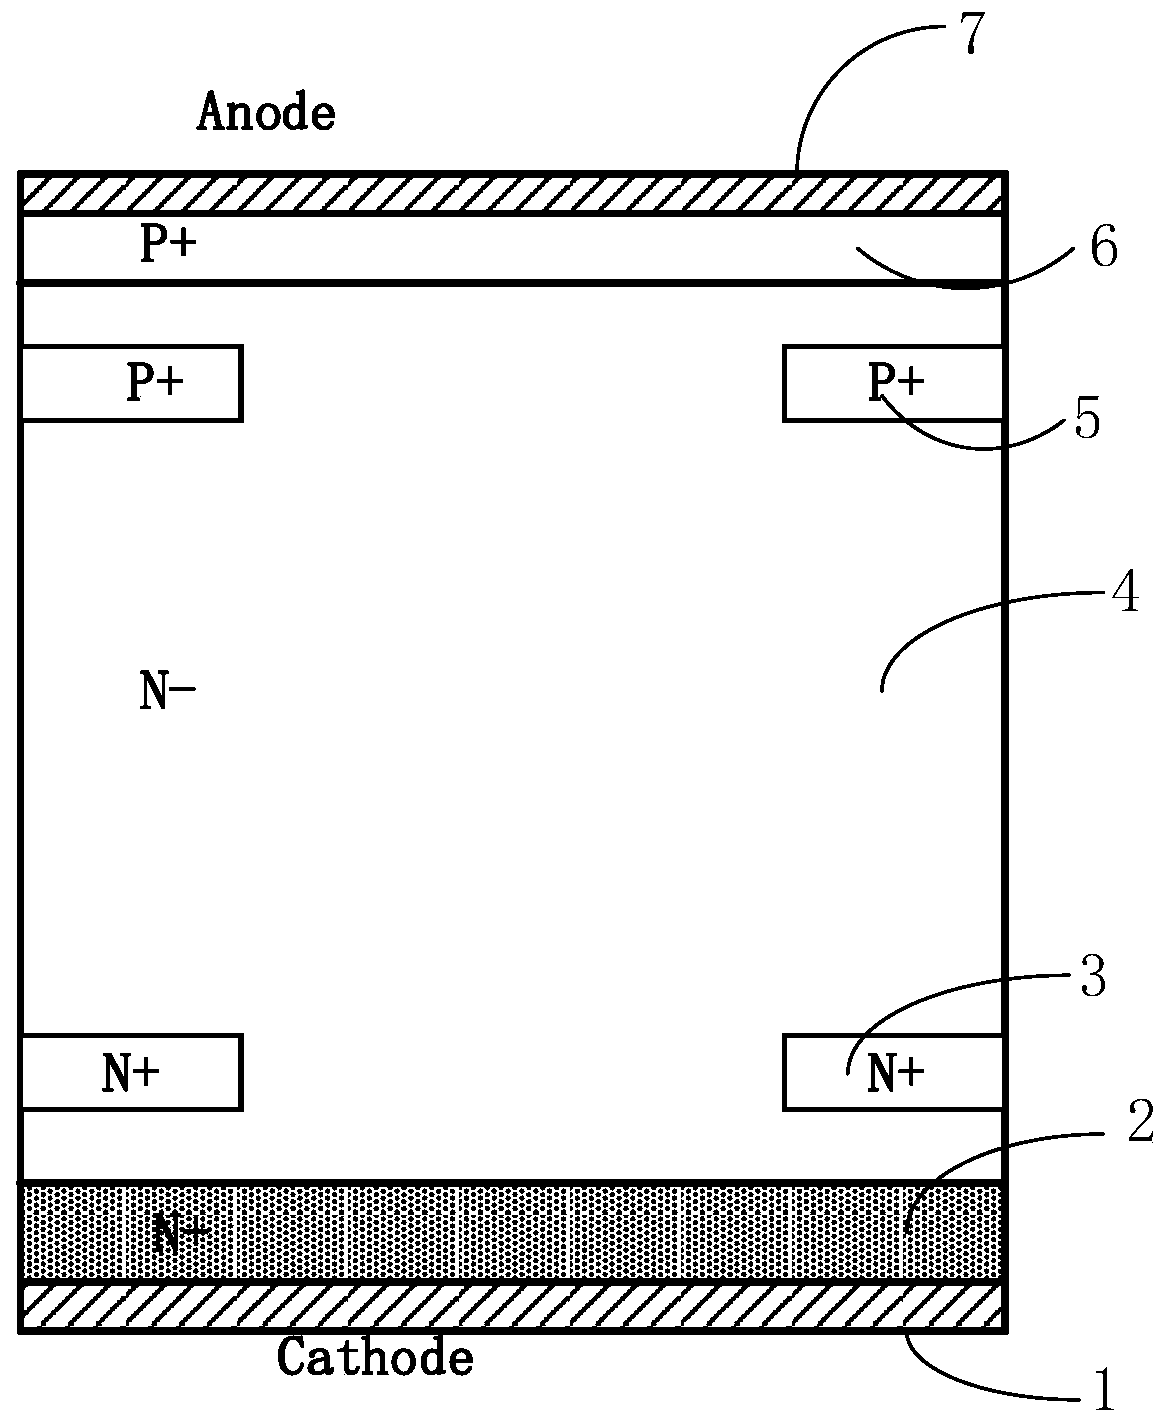 Silicon carbide PiN diode with buried layer structure